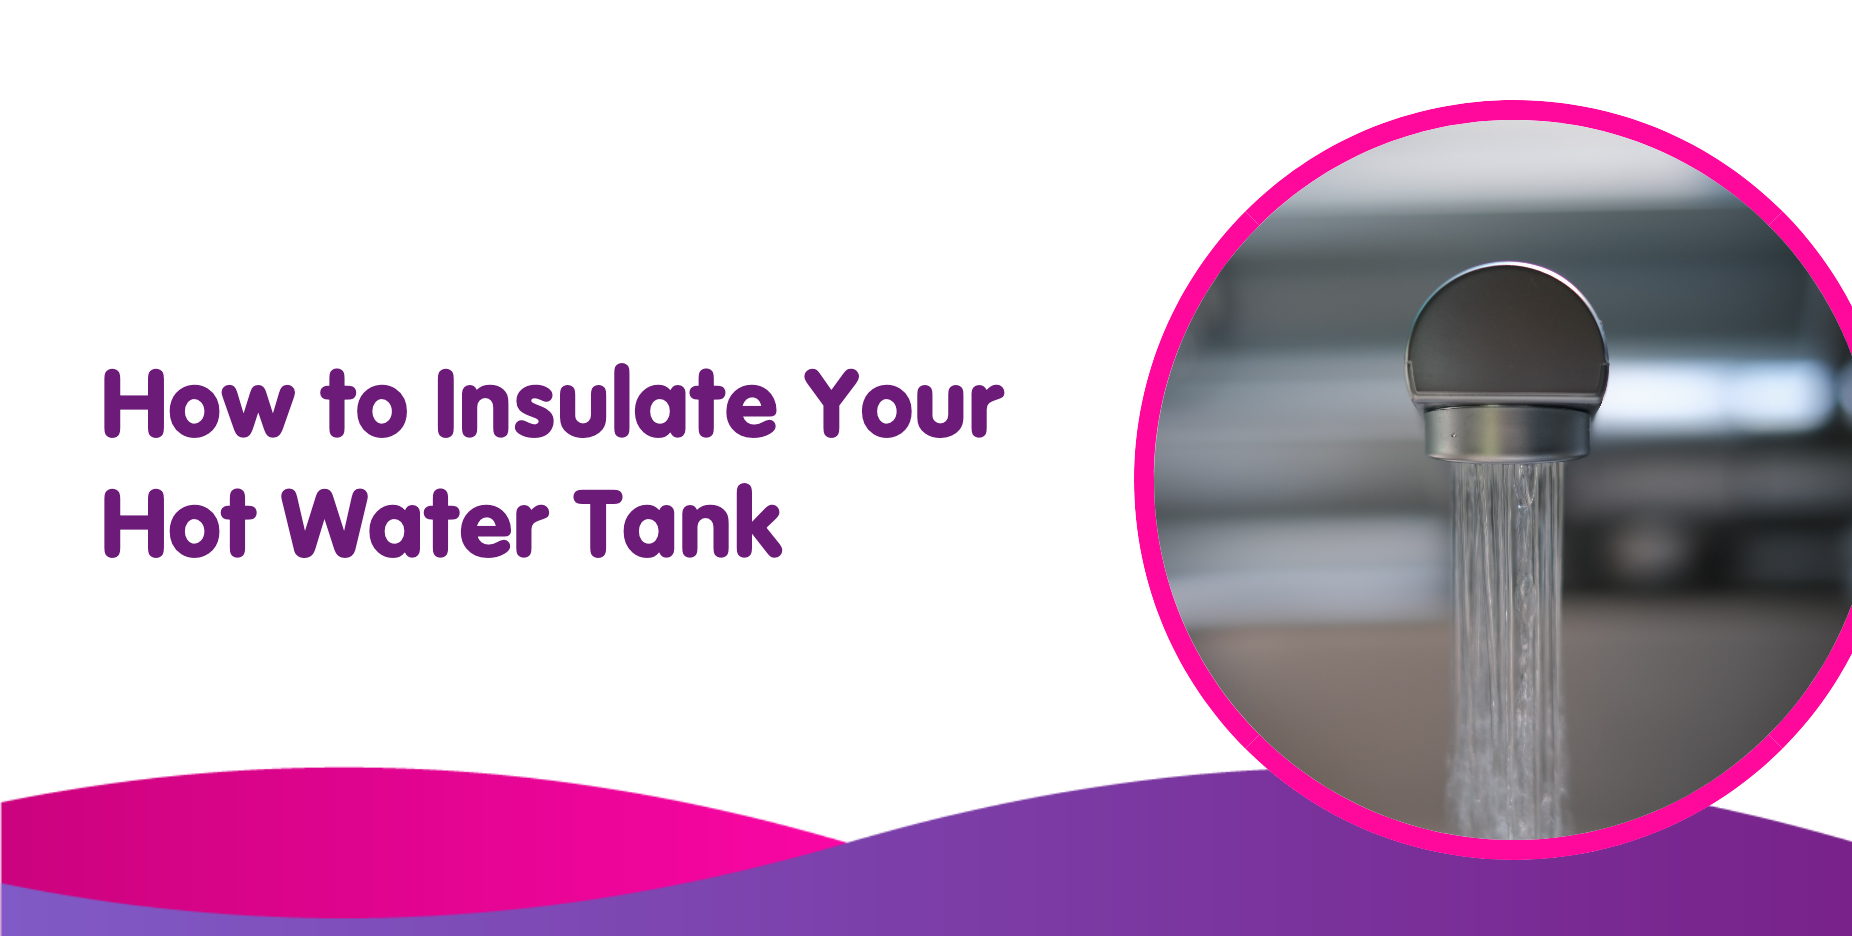 How to Insulate Your Hot Water Tank